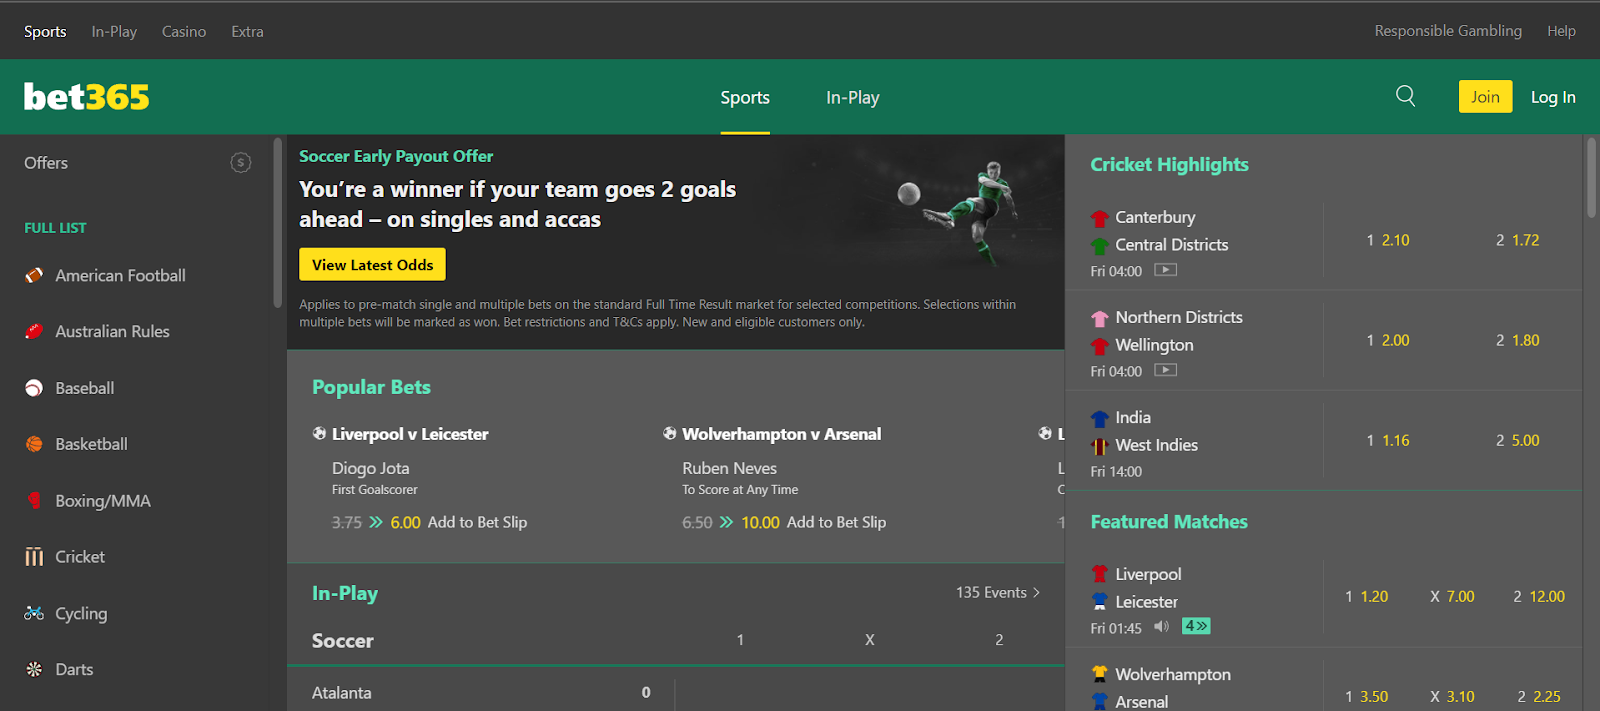 Homepage of bet365 betting website offering login, games to bet and scores of current tournaments.